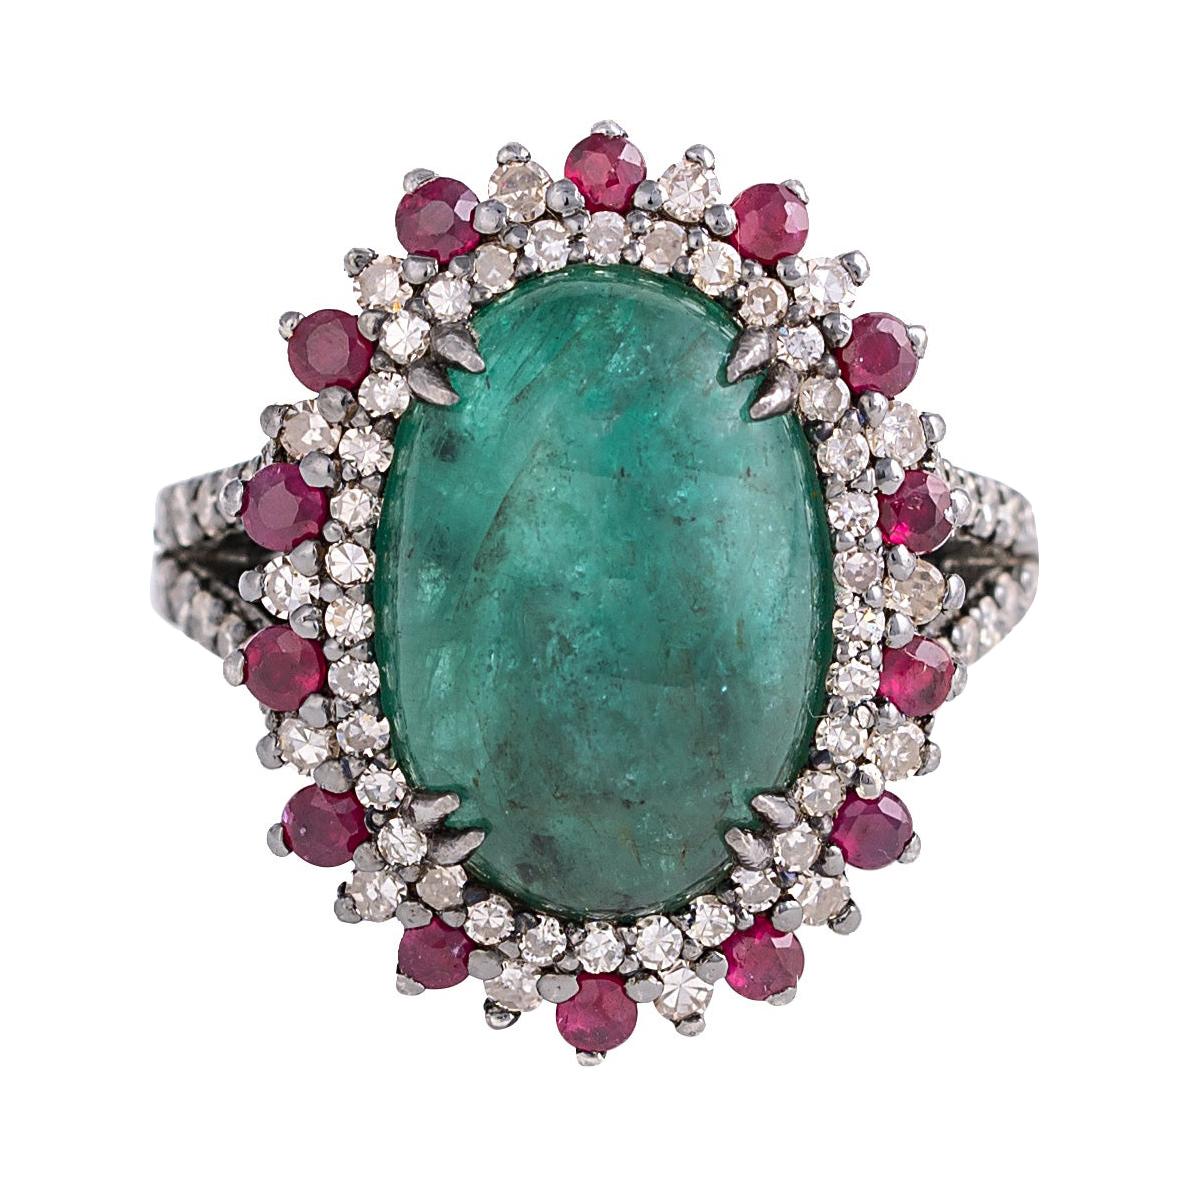 7.70 Carat Cabochon-Cut Emerald, Diamond, and Ruby Cocktail Ring in Art-Deco For Sale